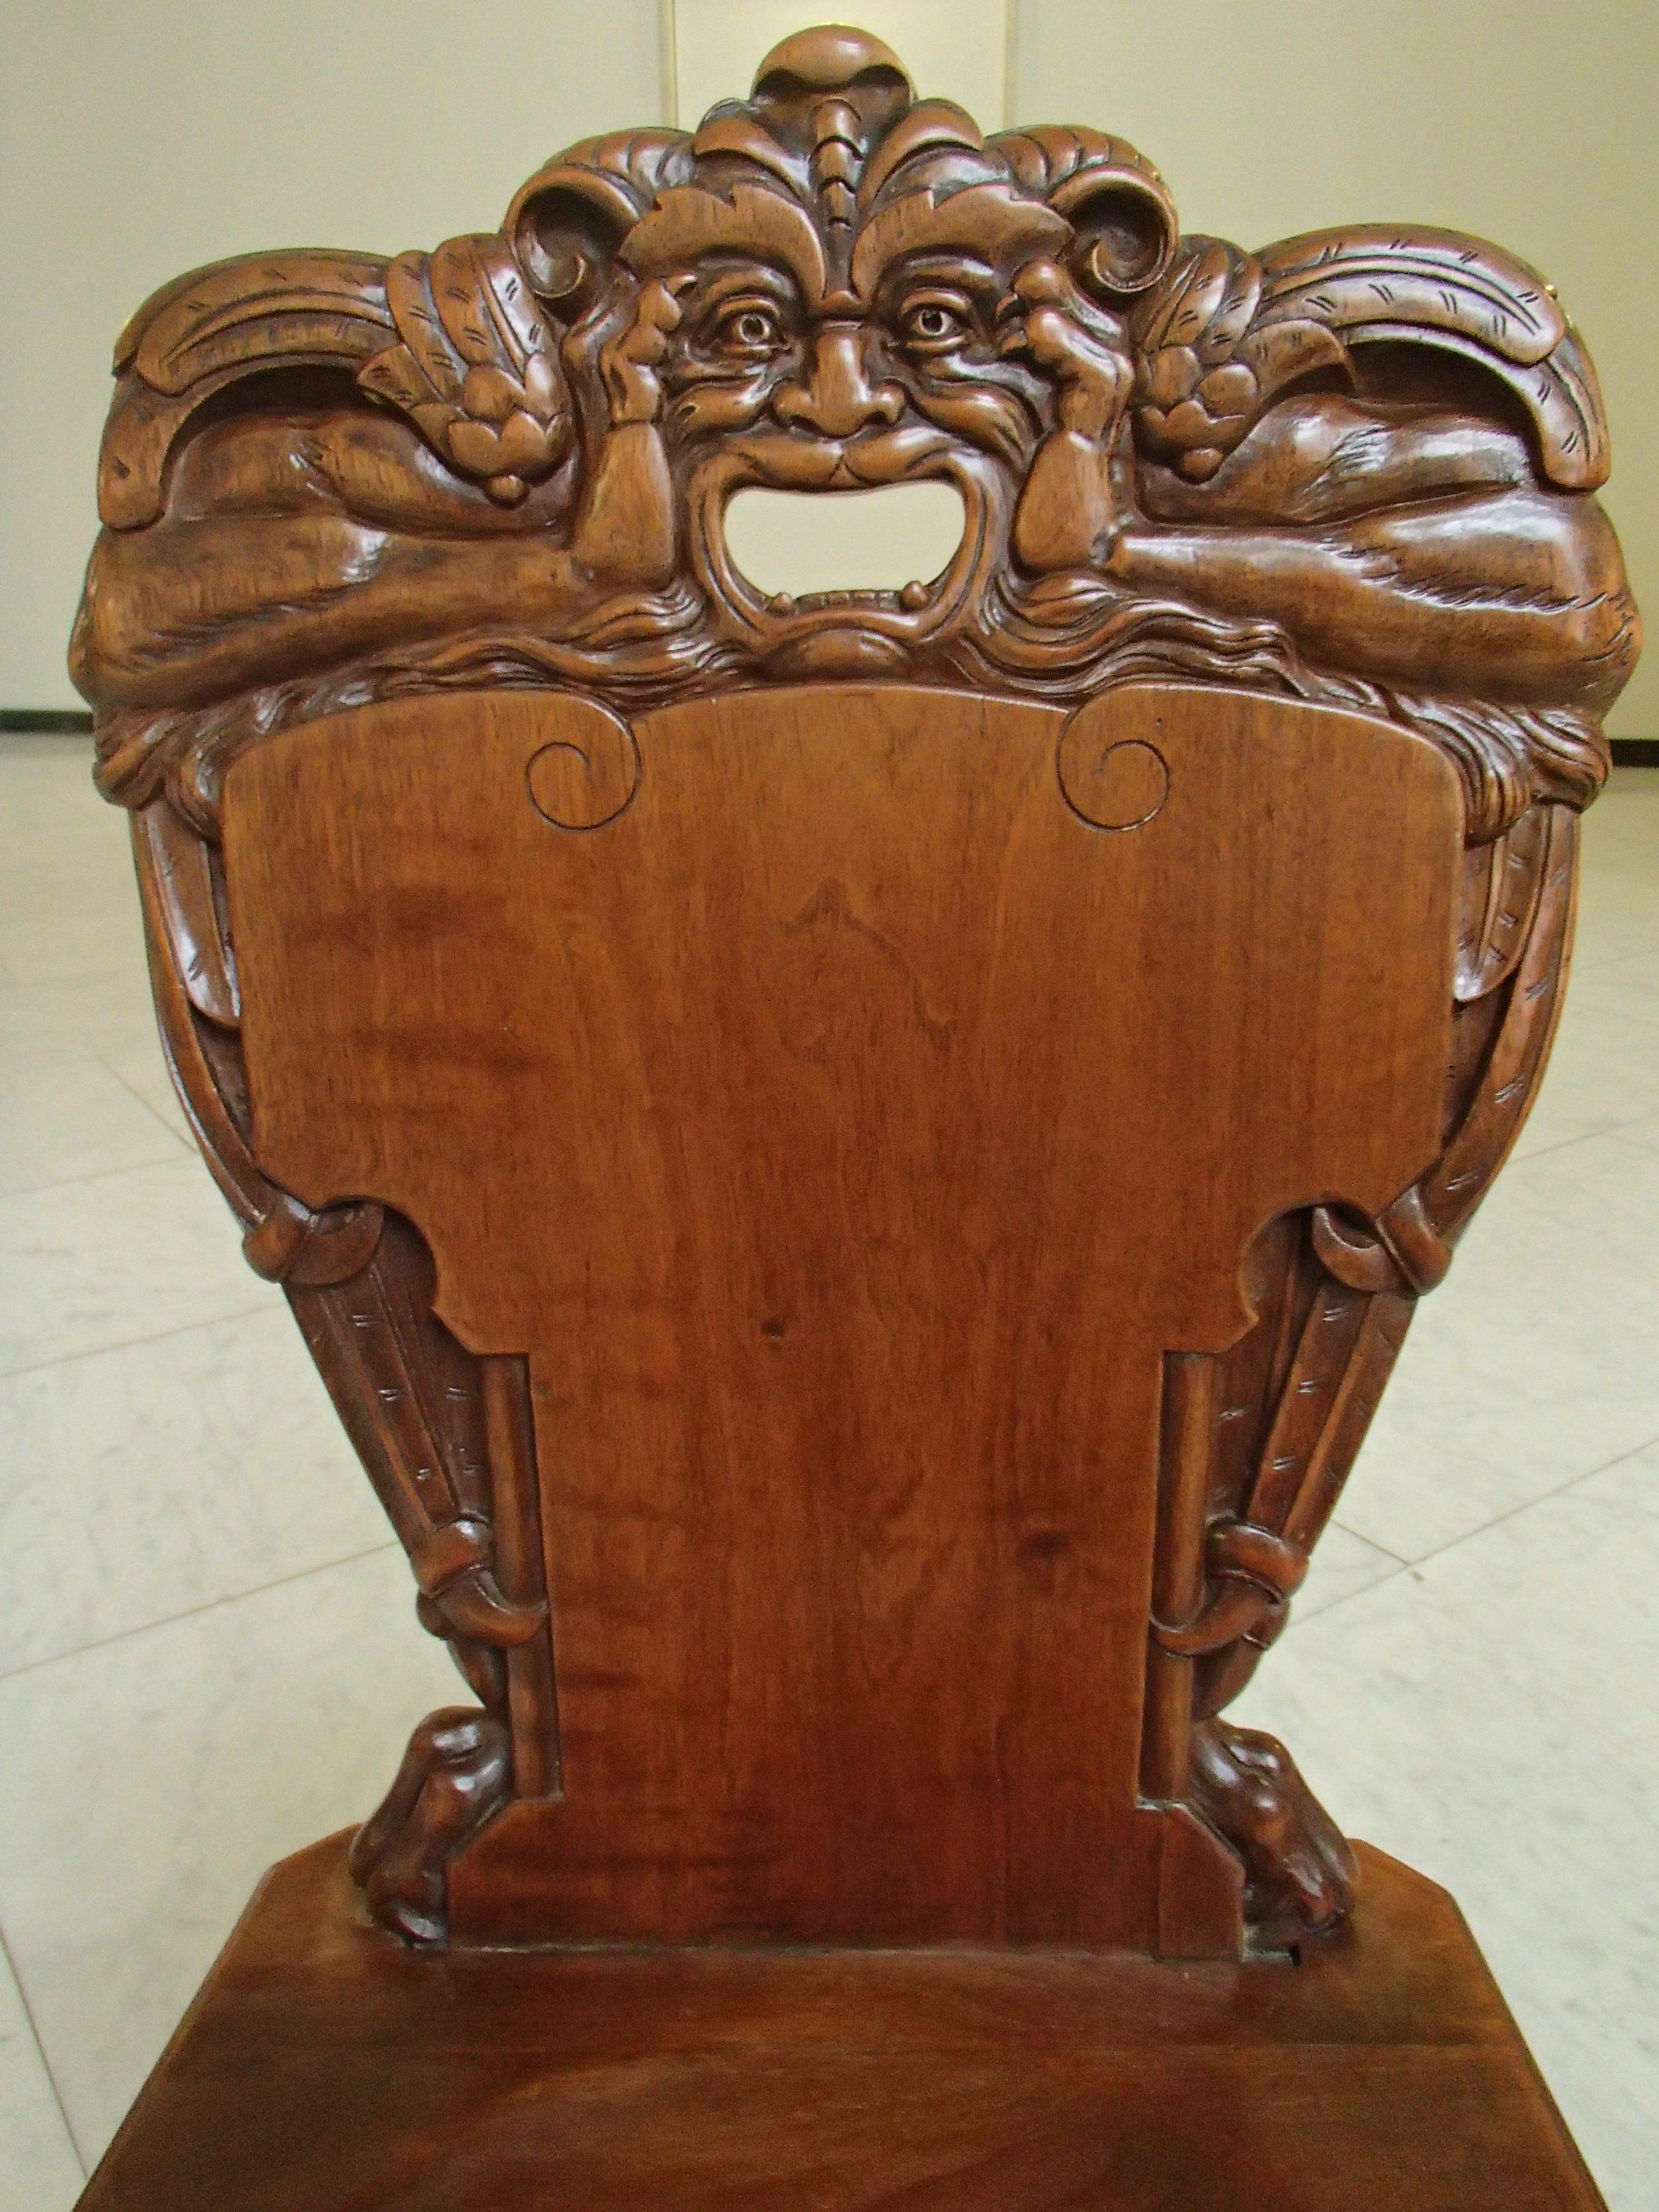 18th century Brutalist wooden chair carved with fabulous creature
totally 5 available see other announces.